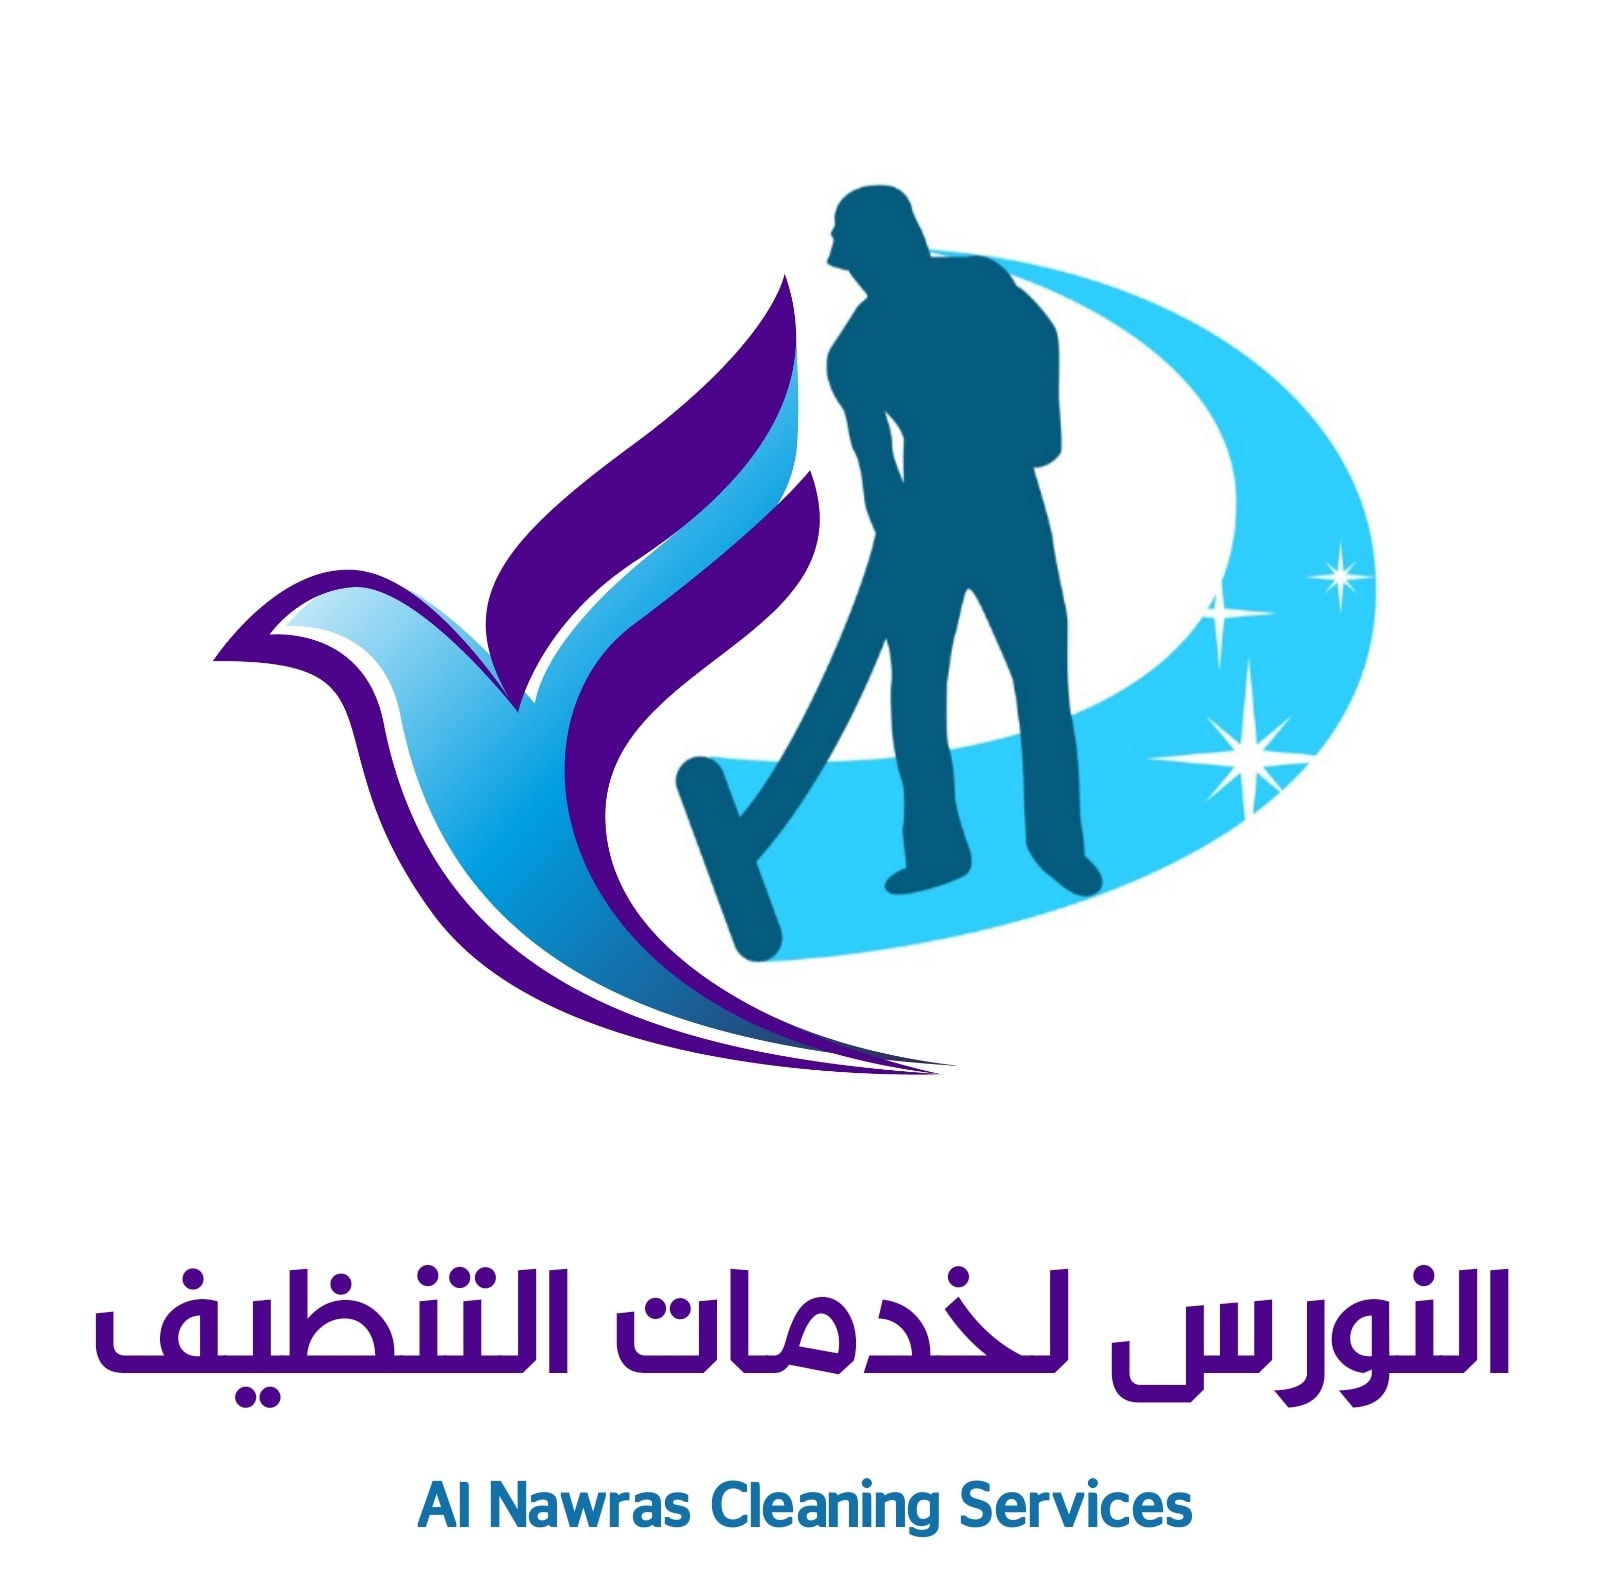 Al Nawras Cleaning Services